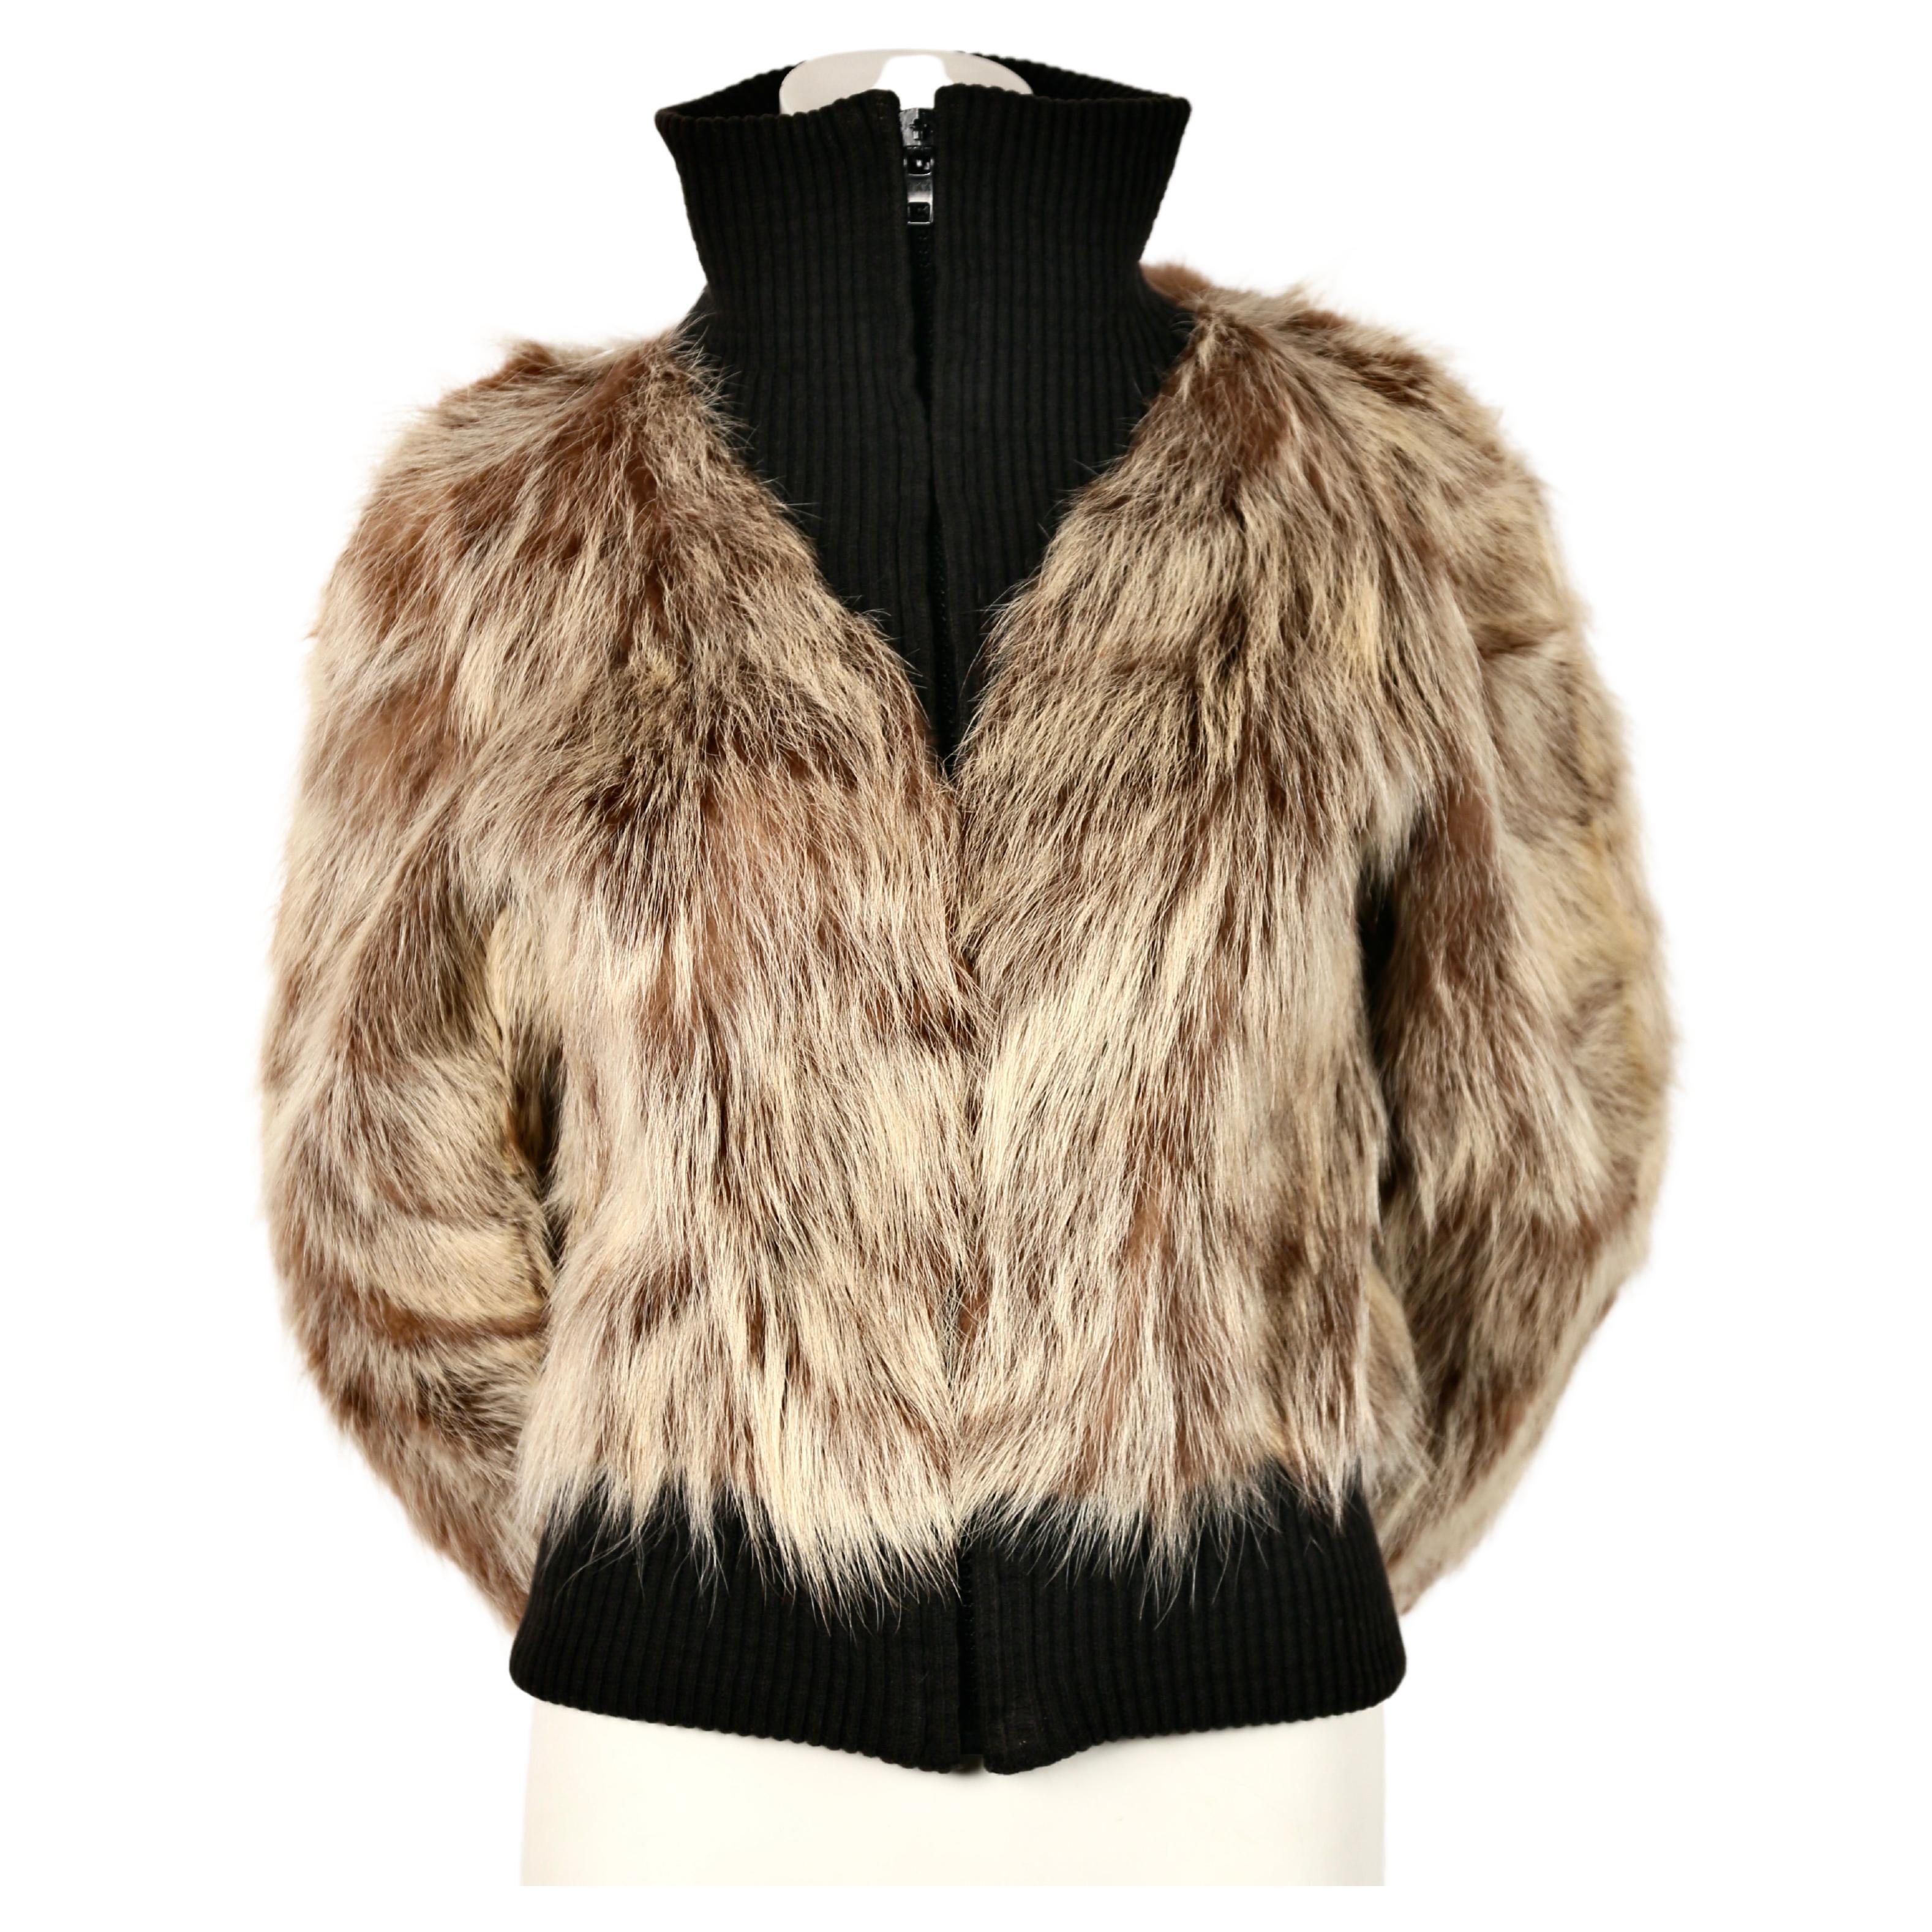 Unique coyote fur coat with soft black ribbed trim from Pierre Cardin dating to the 1970's. Fits sizes 2 through a slim 6. Approximate measurements: shoulders 16